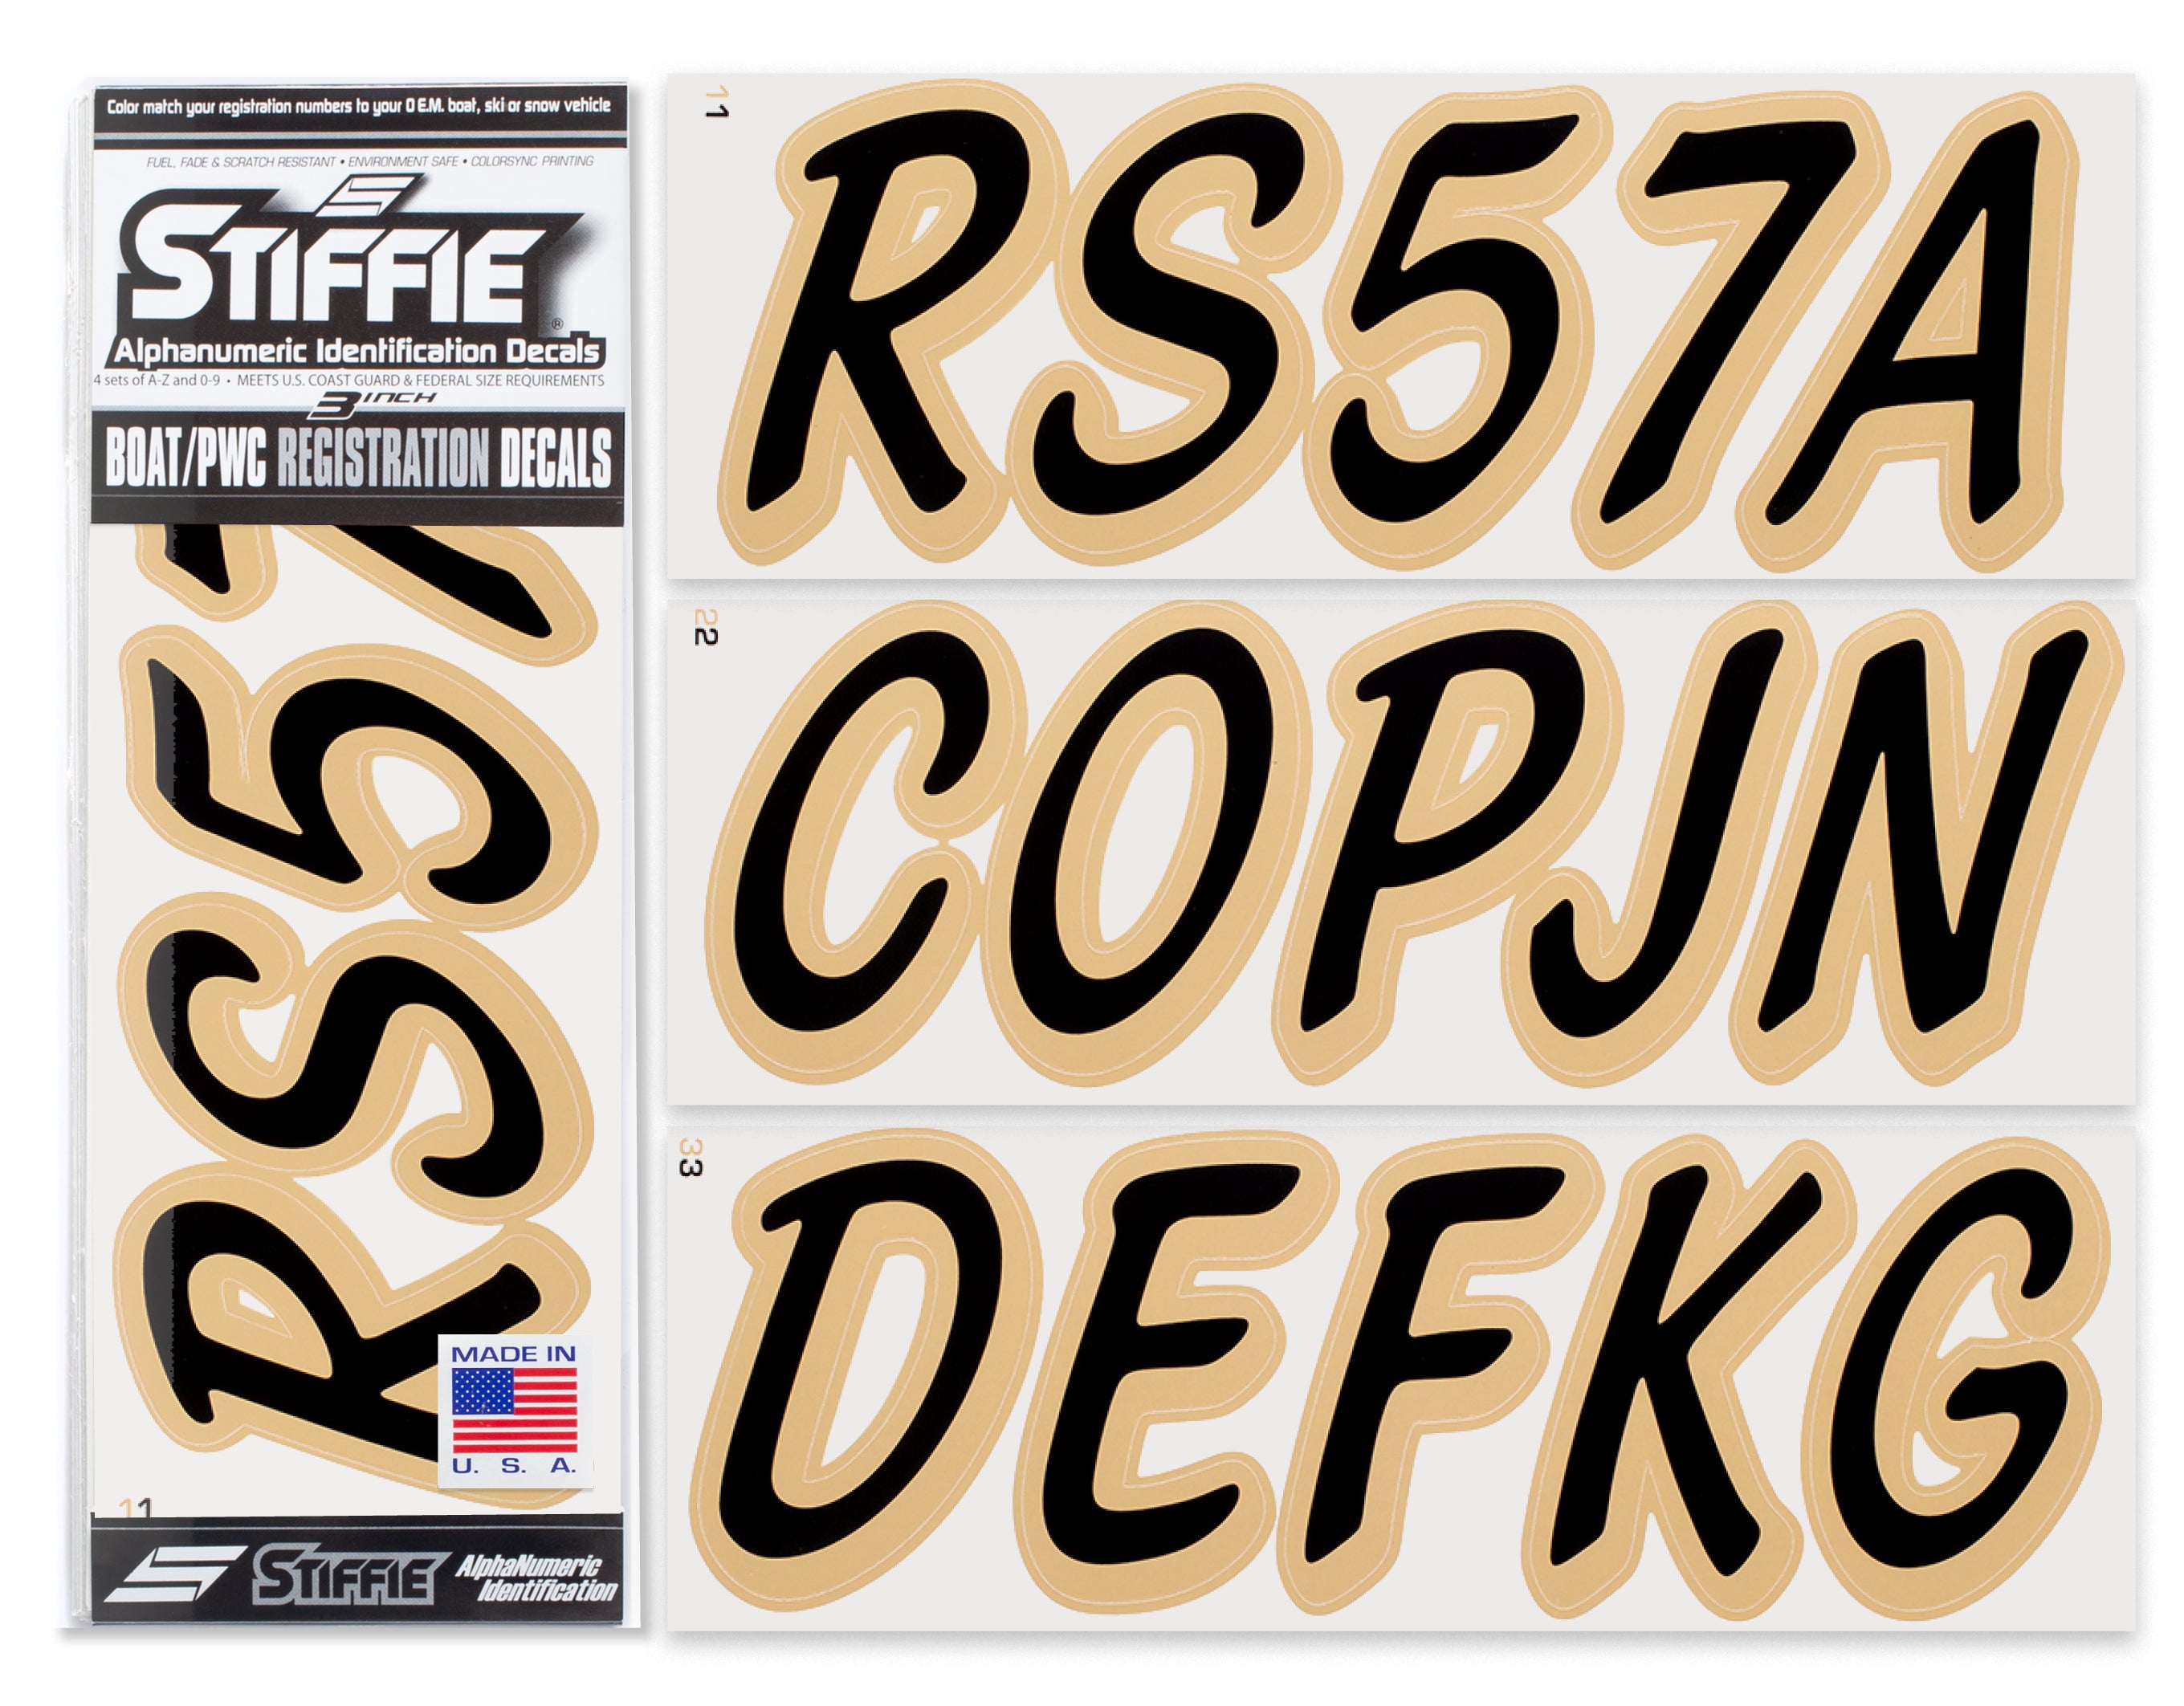 STIFFIE Whipline Solid Black/Tan 3" Alpha-Numeric Registration Identification Numbers Stickers Decals for Boats & Personal Watercraft